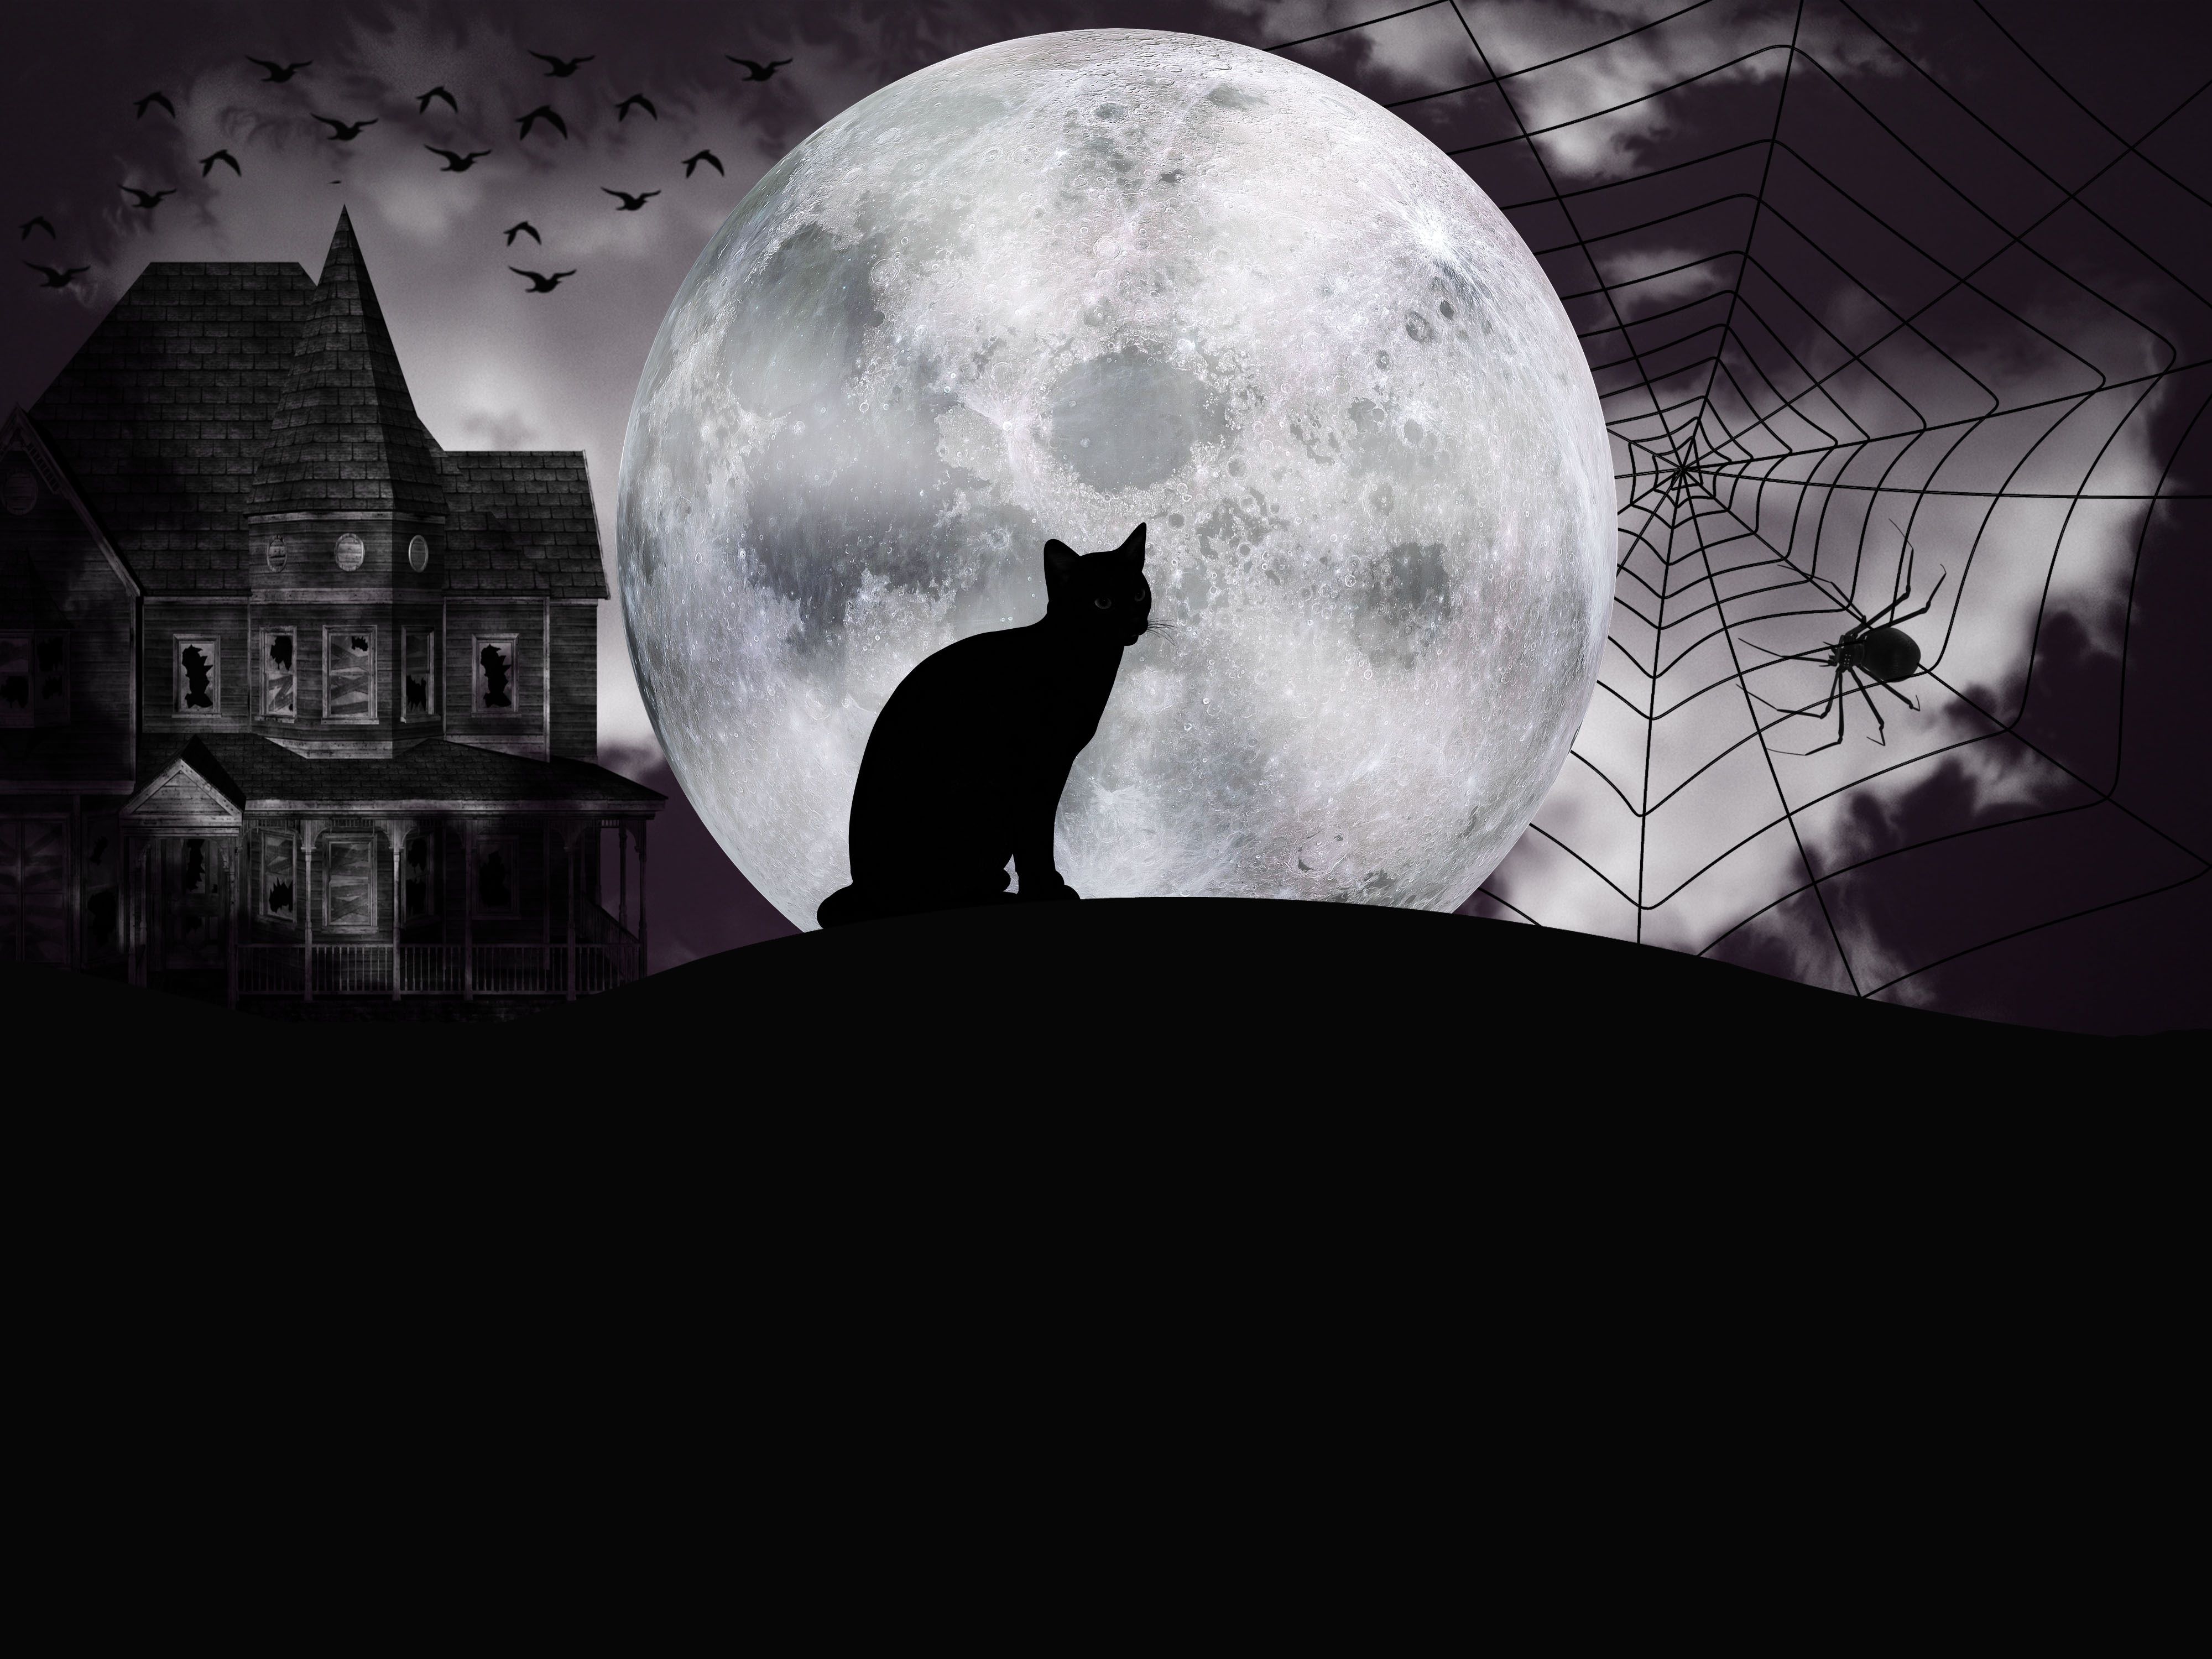 Black cat on the background of the big moon on Halloween wallpaper and image, picture, photo